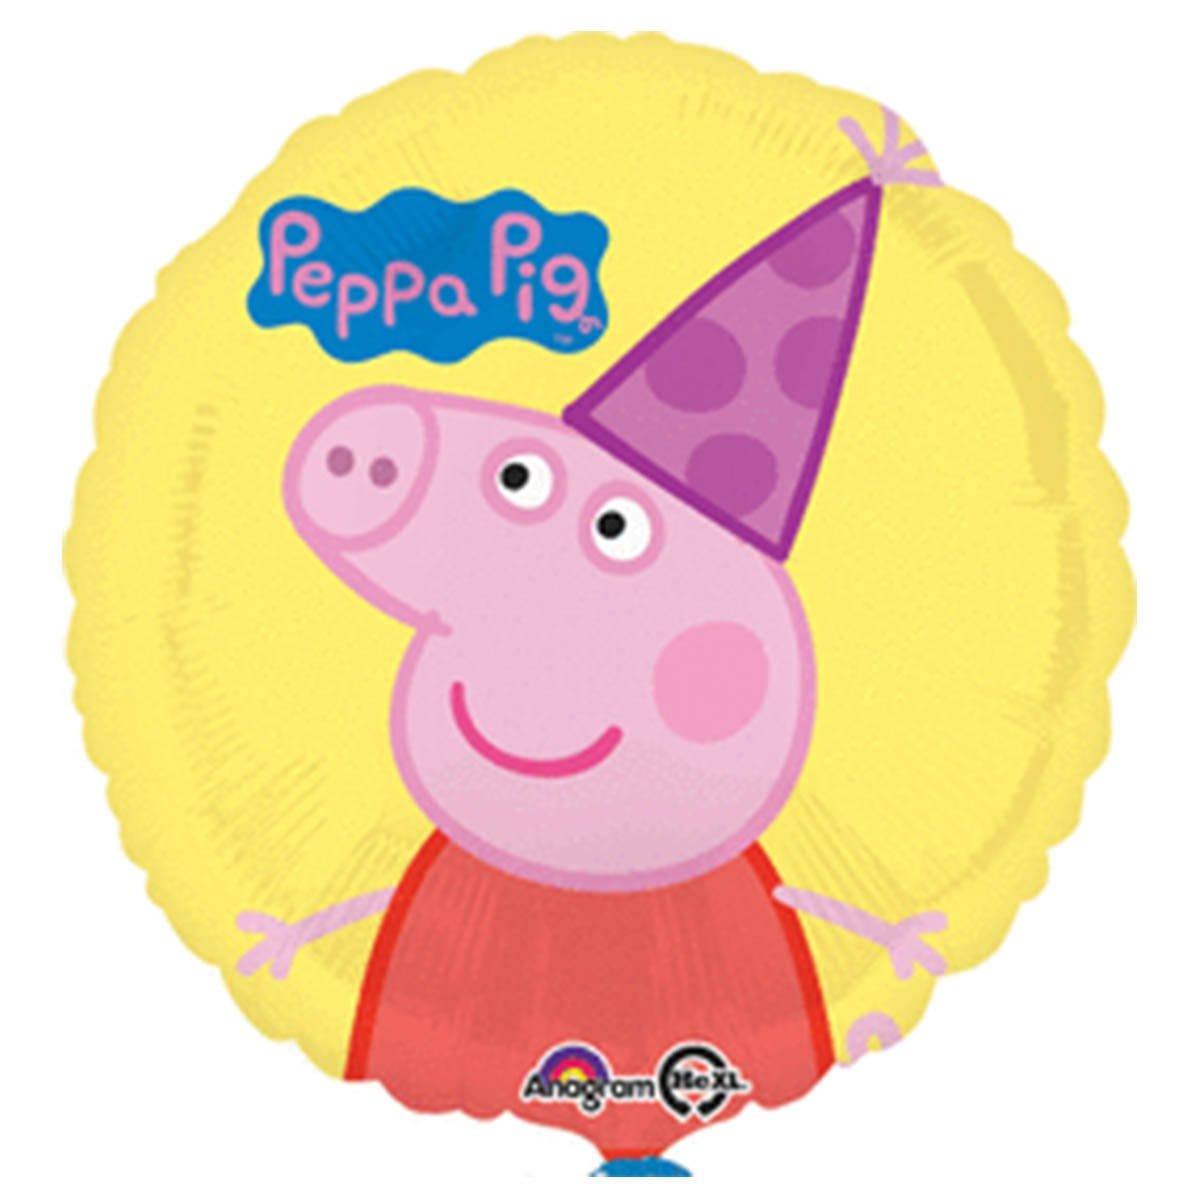 Buy Balloons Peppa Pig Foil Balloon, 18 Inches sold at Party Expert